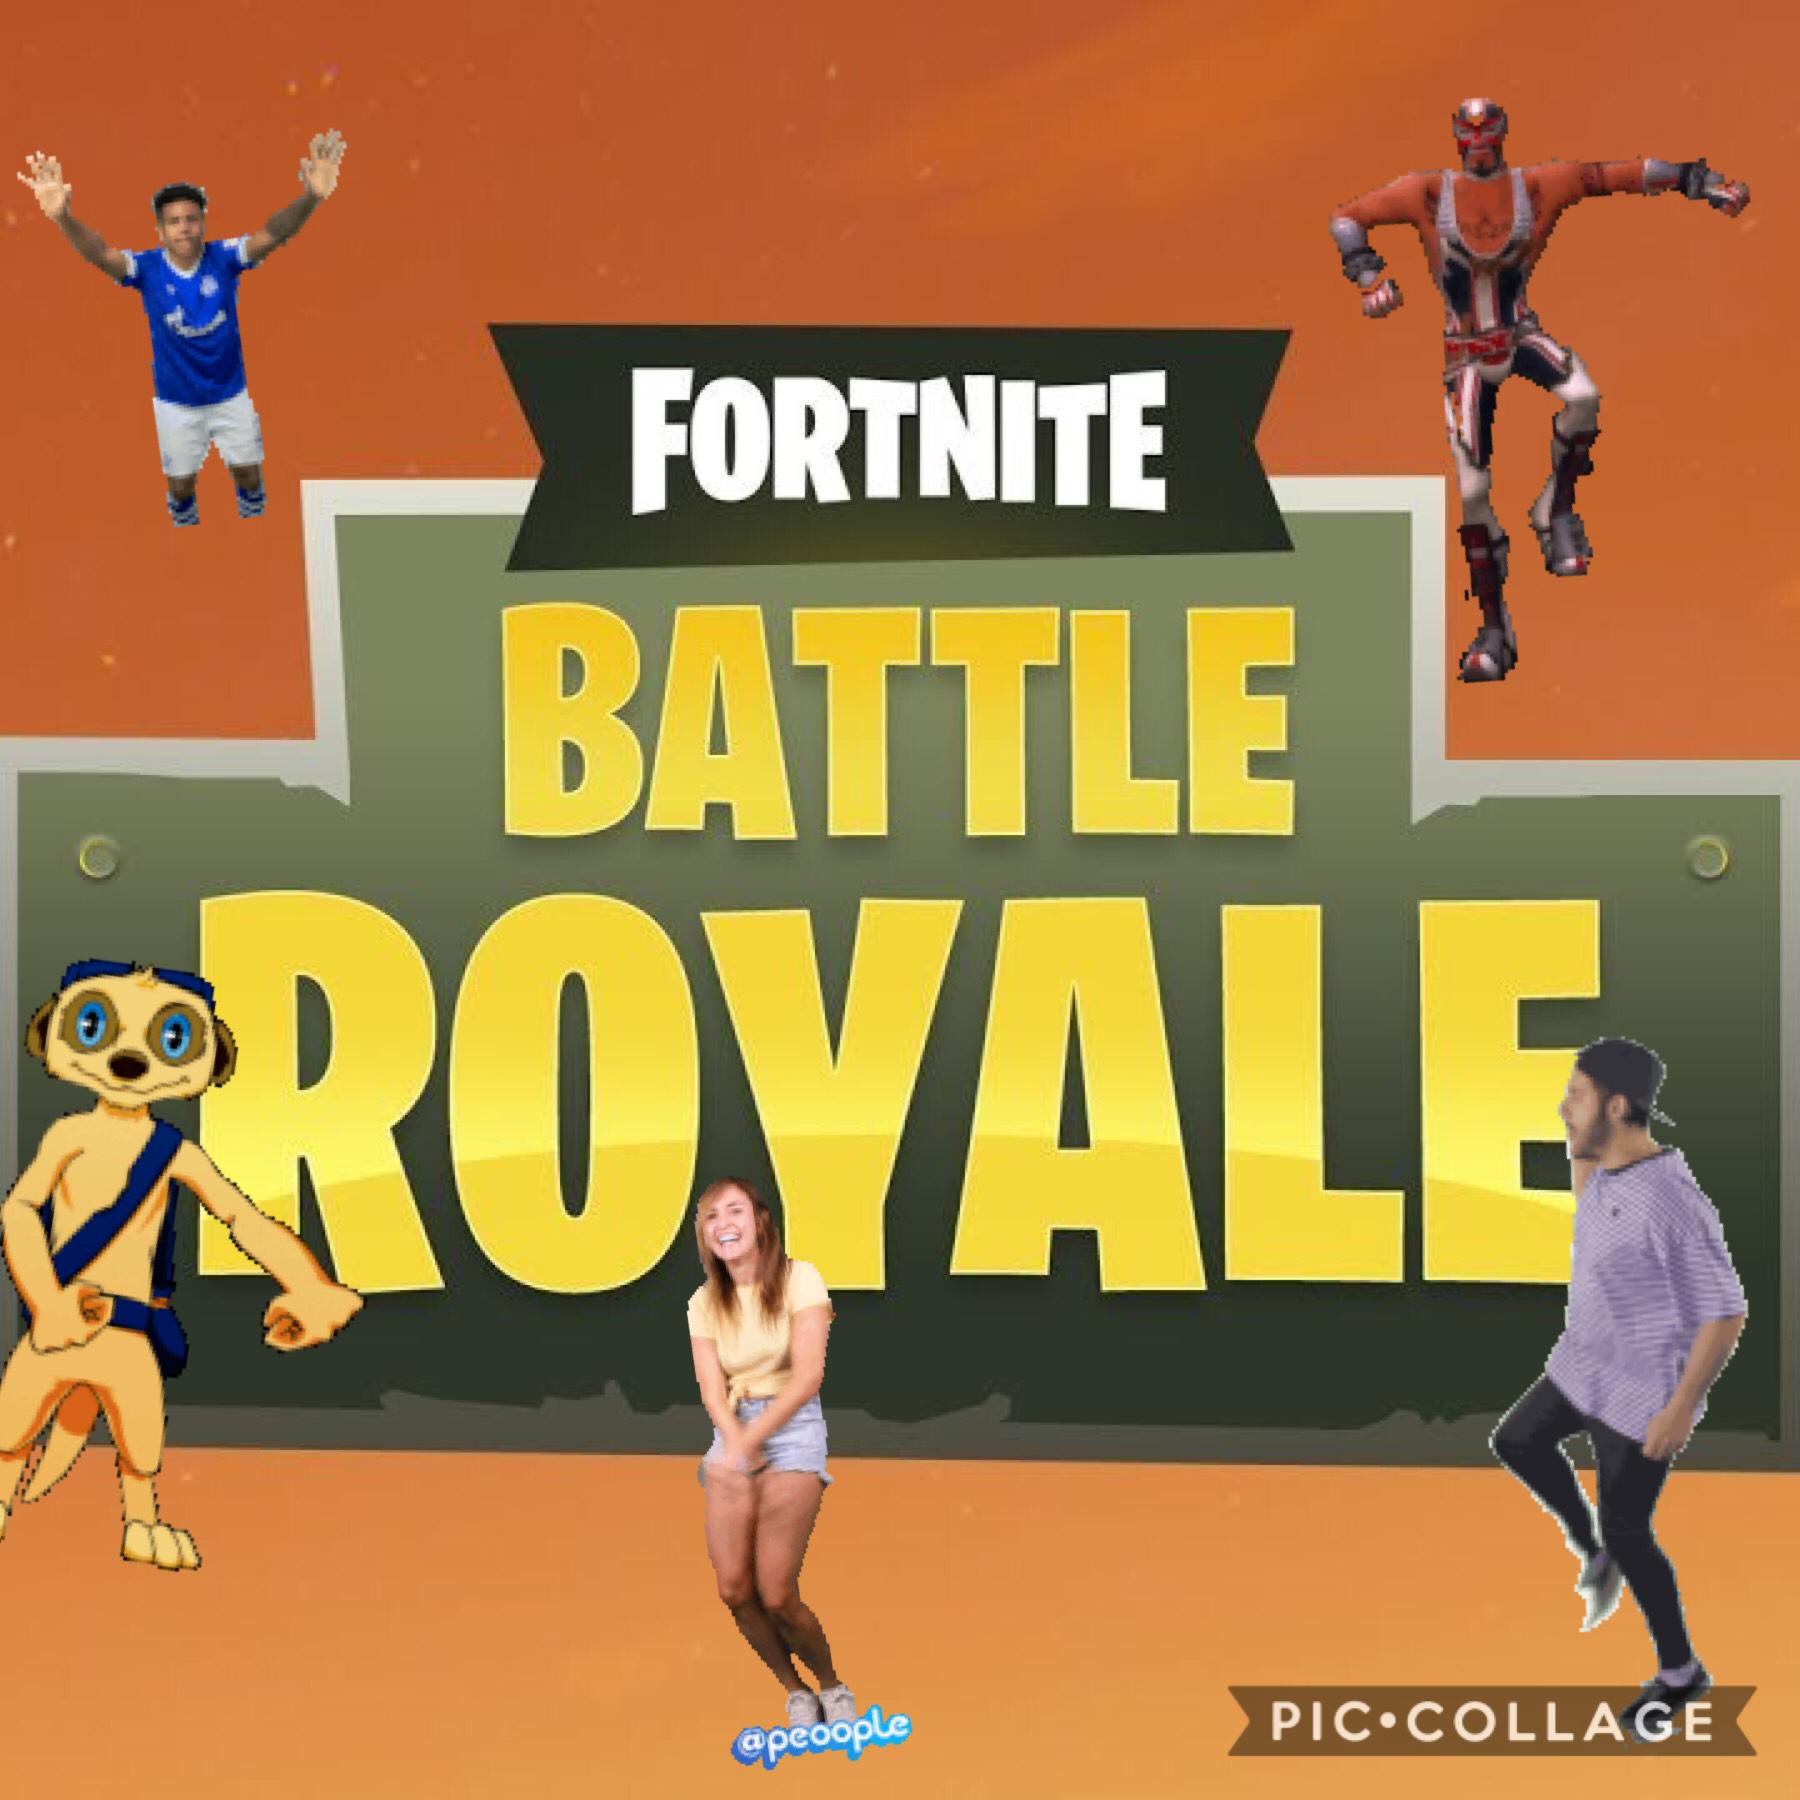 I do not like fort nite but it was a dare!